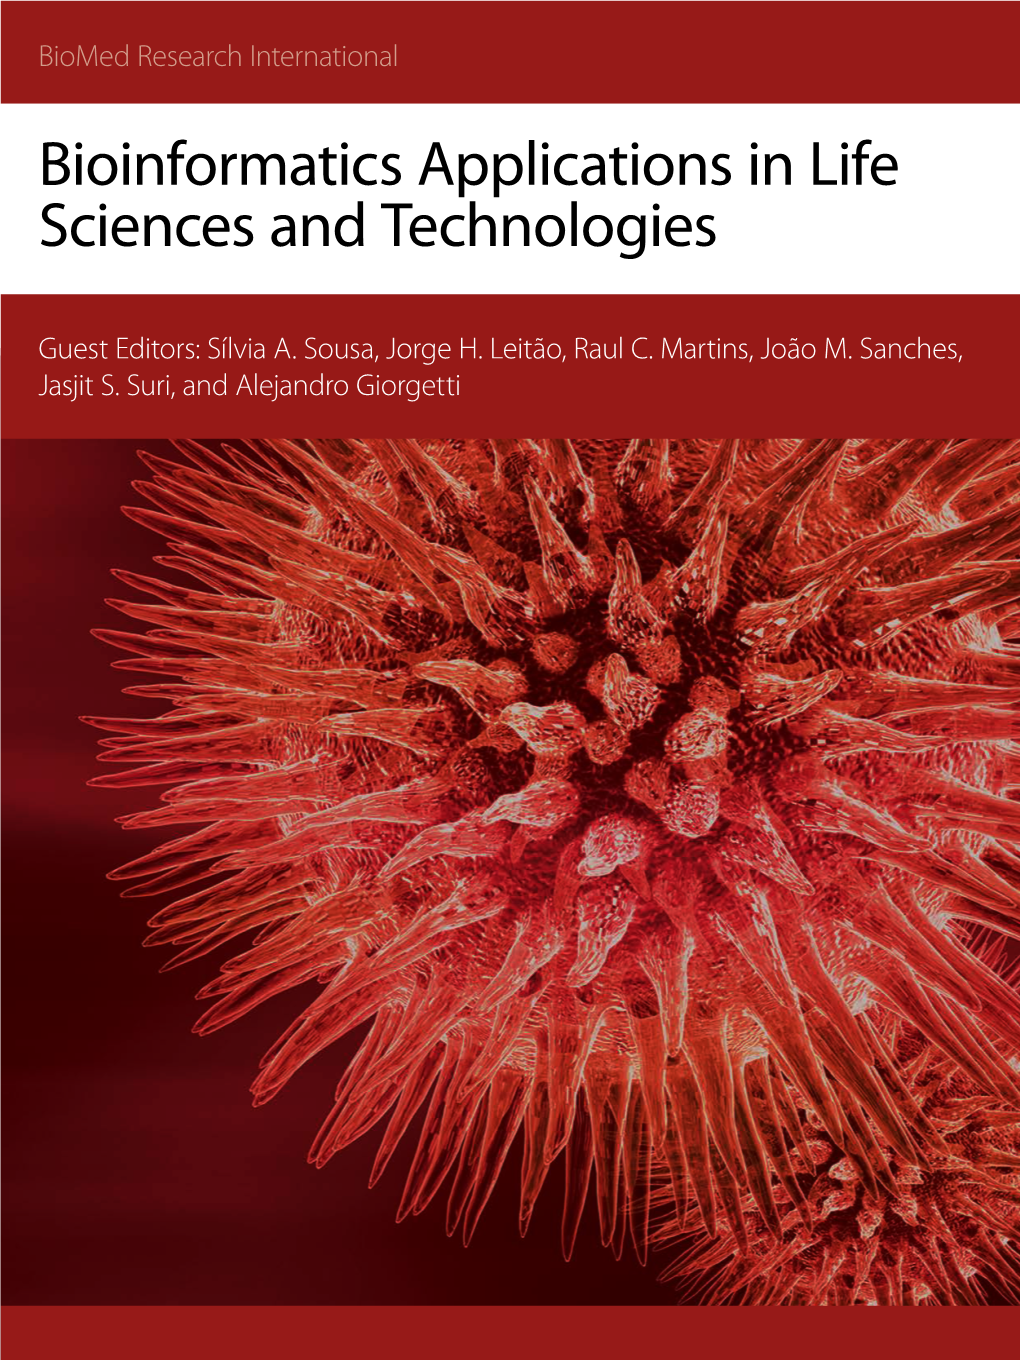 Bioinformatics Applications in Life Sciences and Technologies